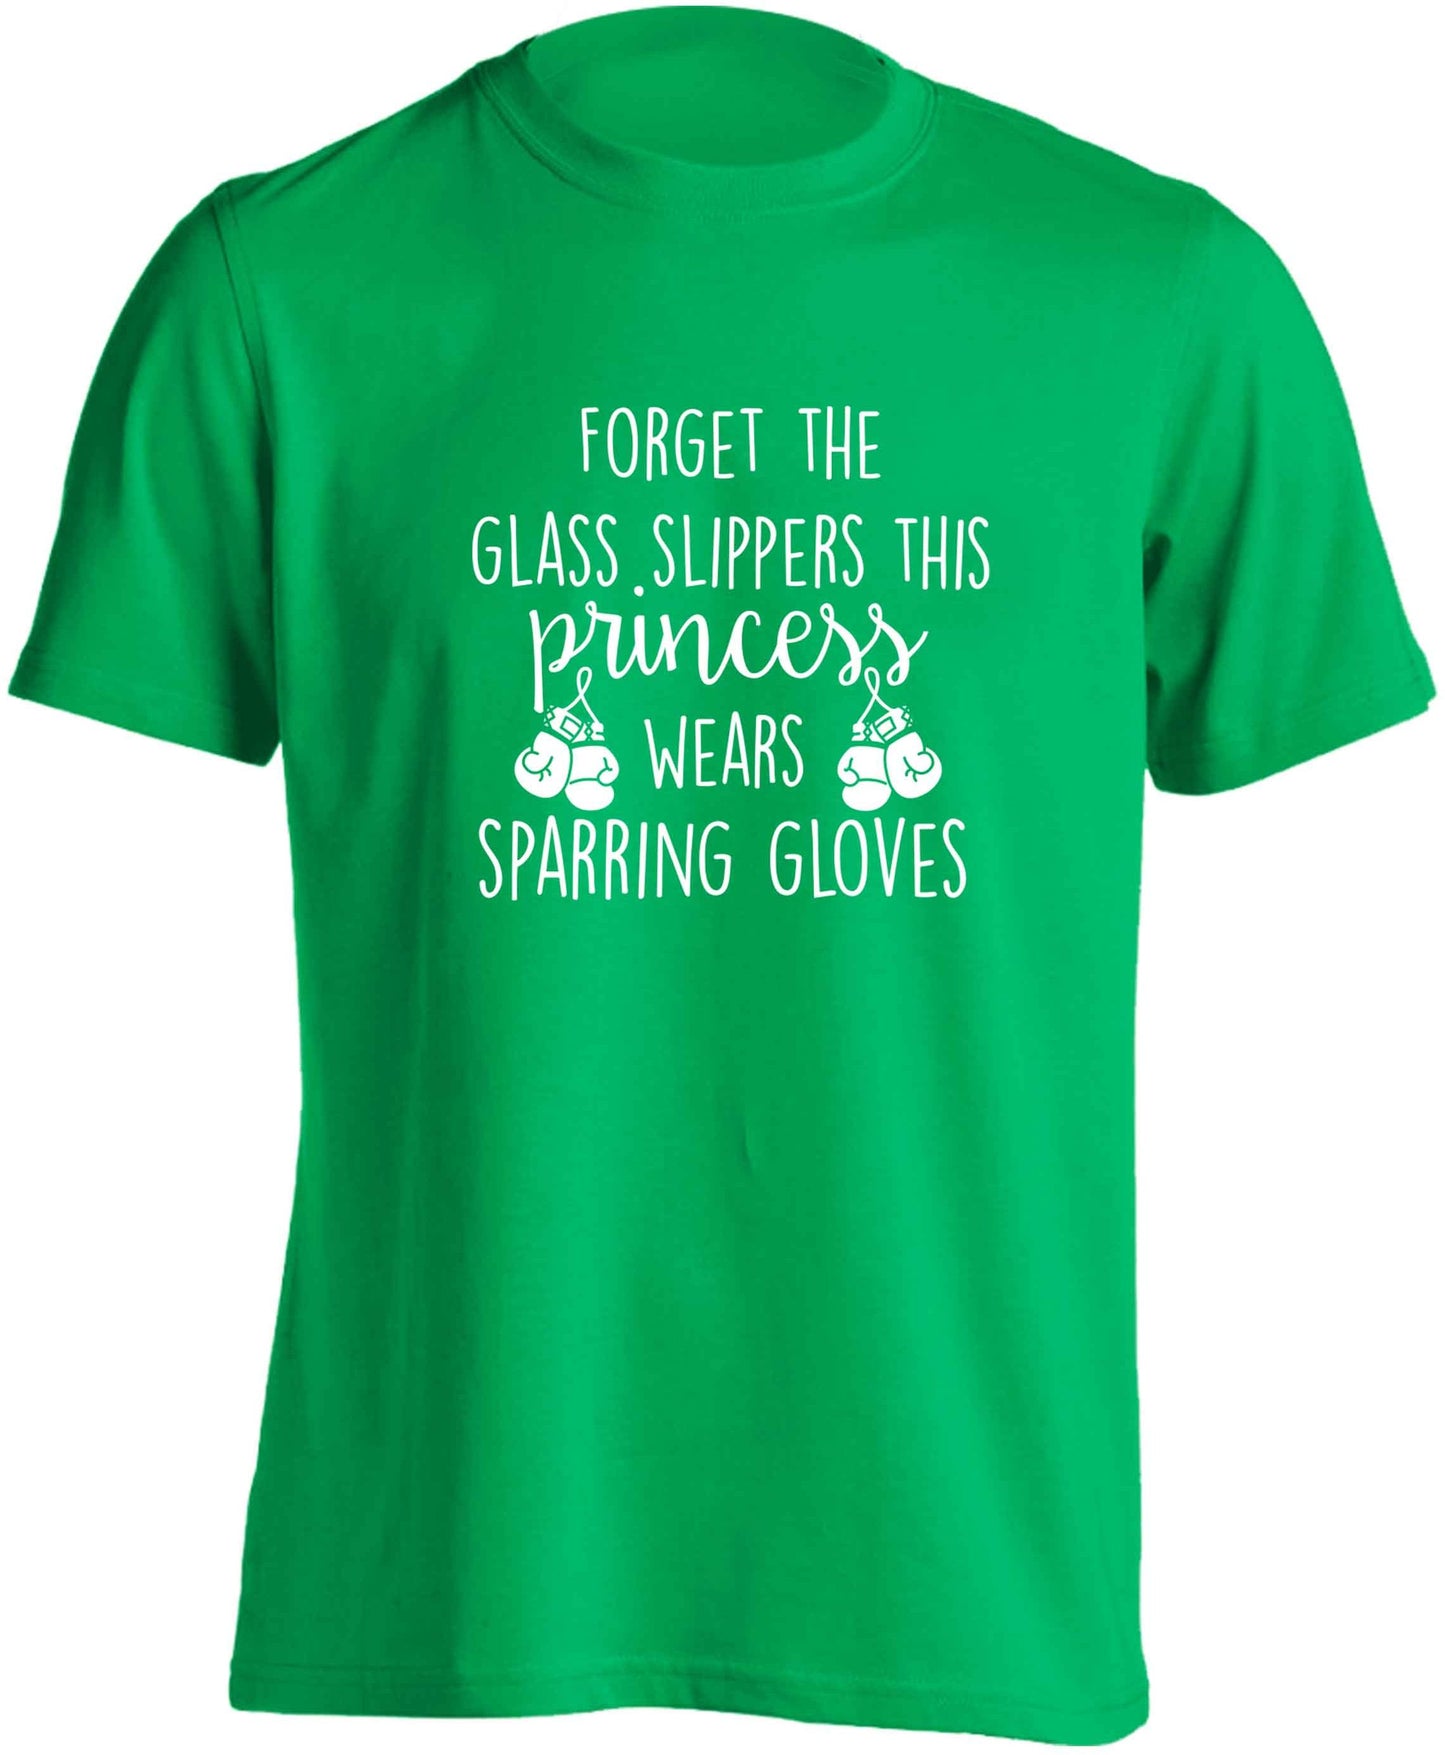 Forget the glass slippers this princess wears sparring gloves adults unisex green Tshirt 2XL